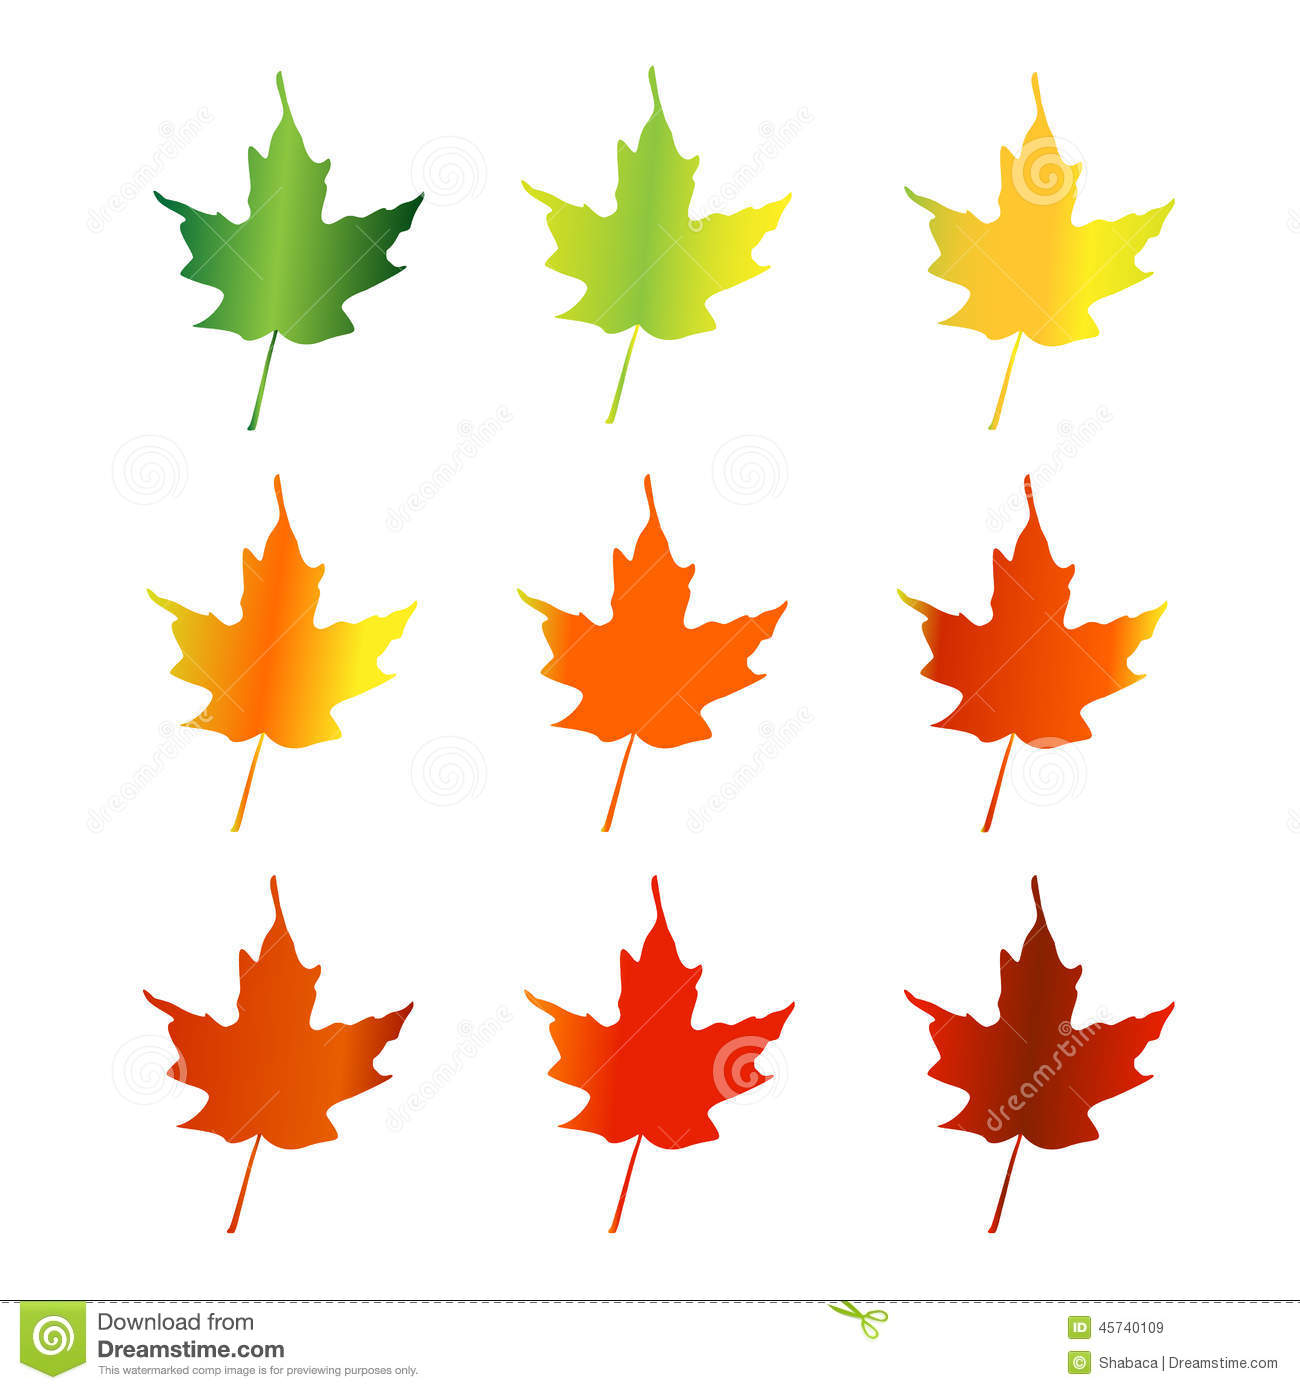 Leaves changing color clipart.